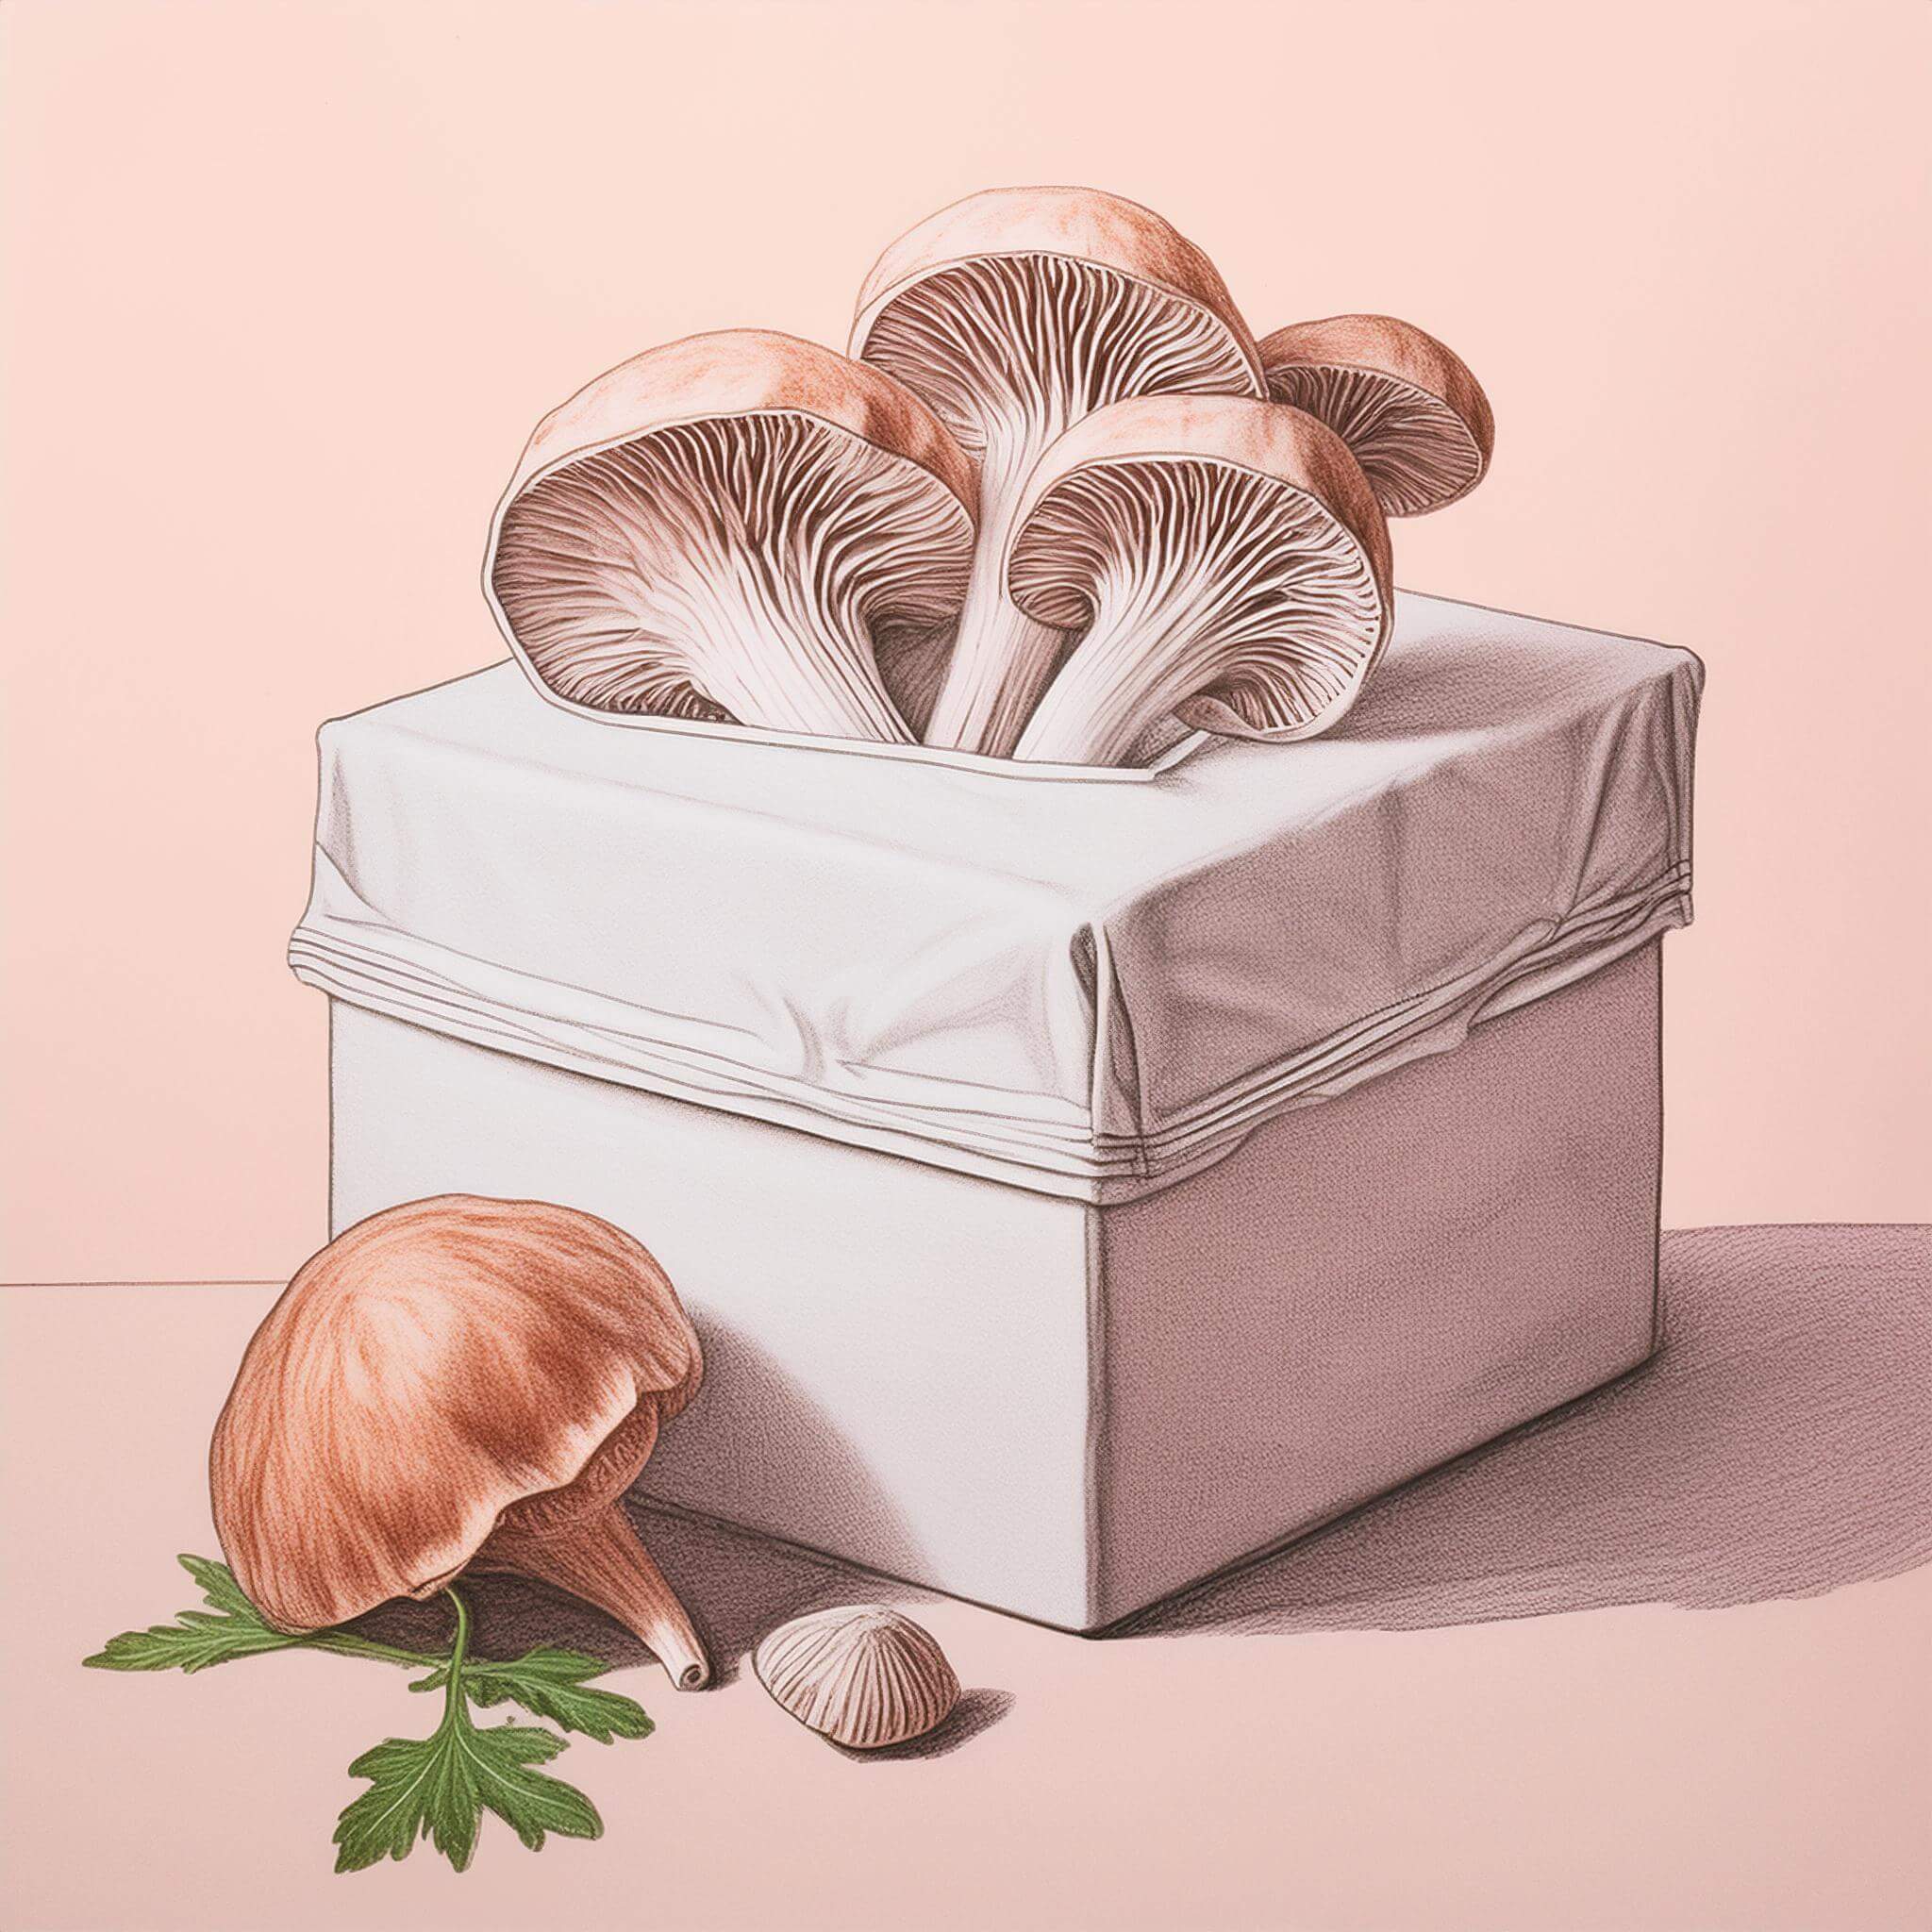 drawing of mushrooms and tissue box illustrating mushrooms for allergies